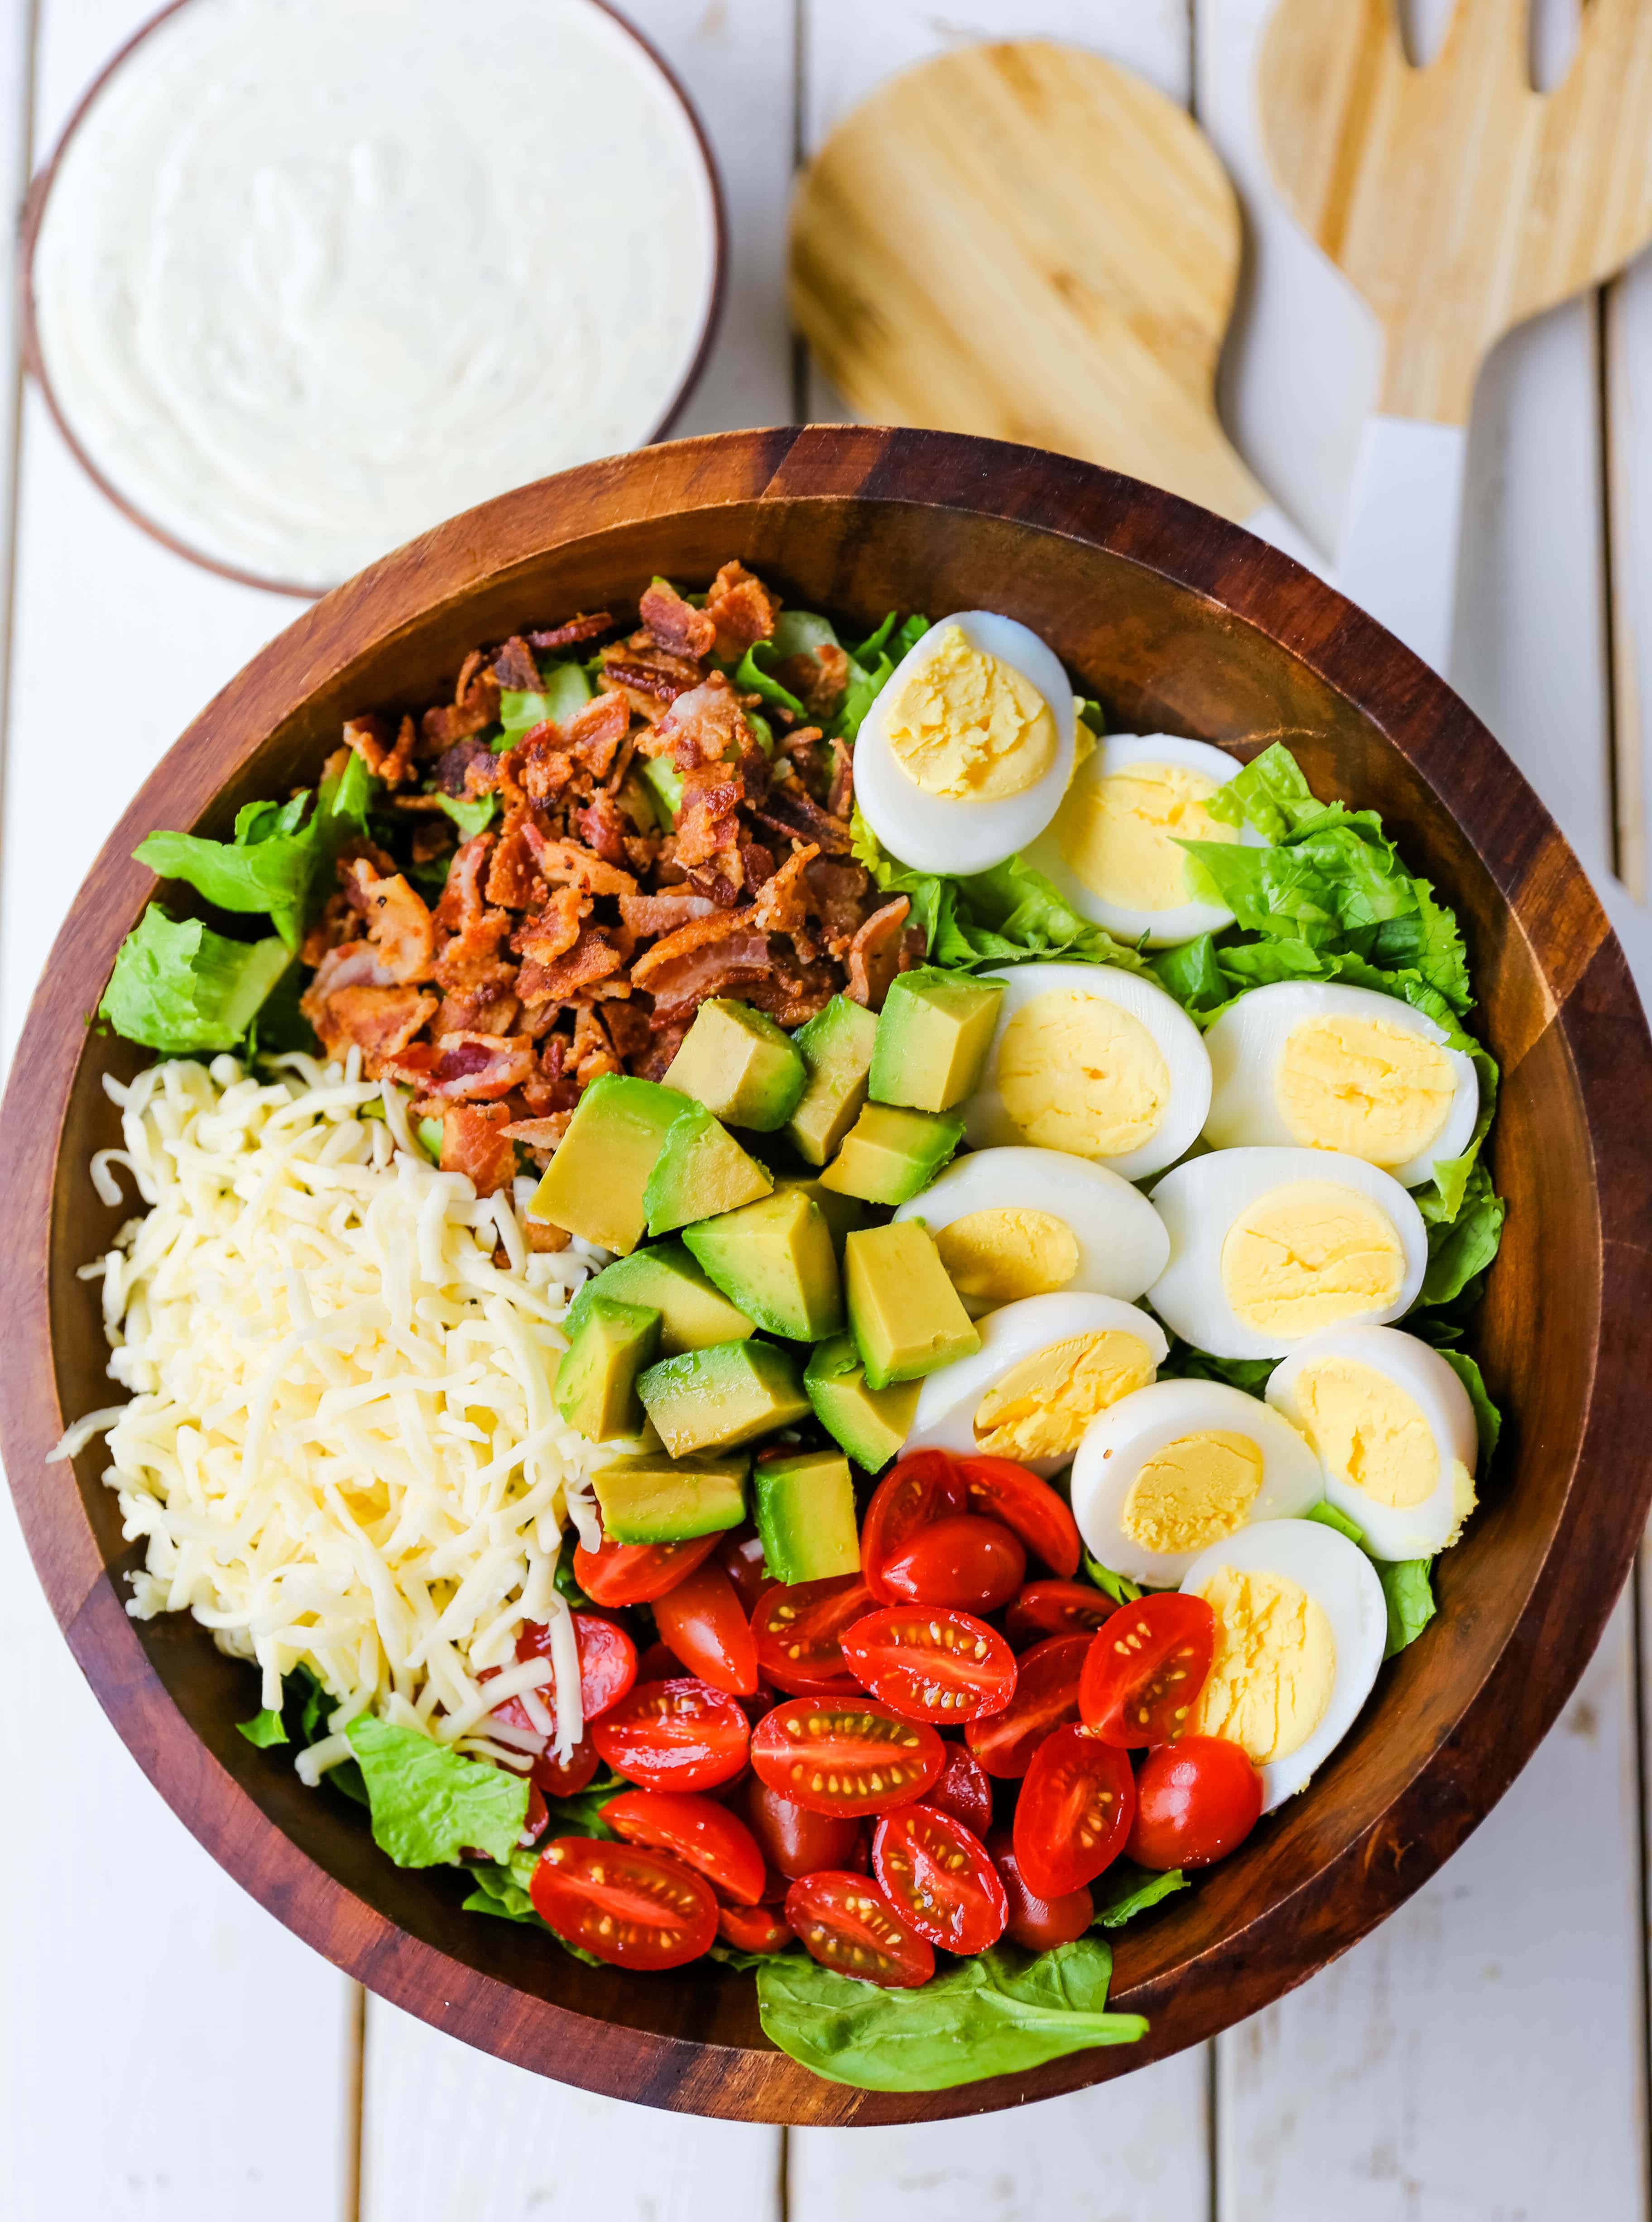 Cobb Salad made with romaine lettuce, crispy bacon, creamy avocado, juicy tomato, egg, Monterey Jack cheese, tossed in homemade Ranch dressing. www.modernhoney.com #salad #cobbsalad #salads